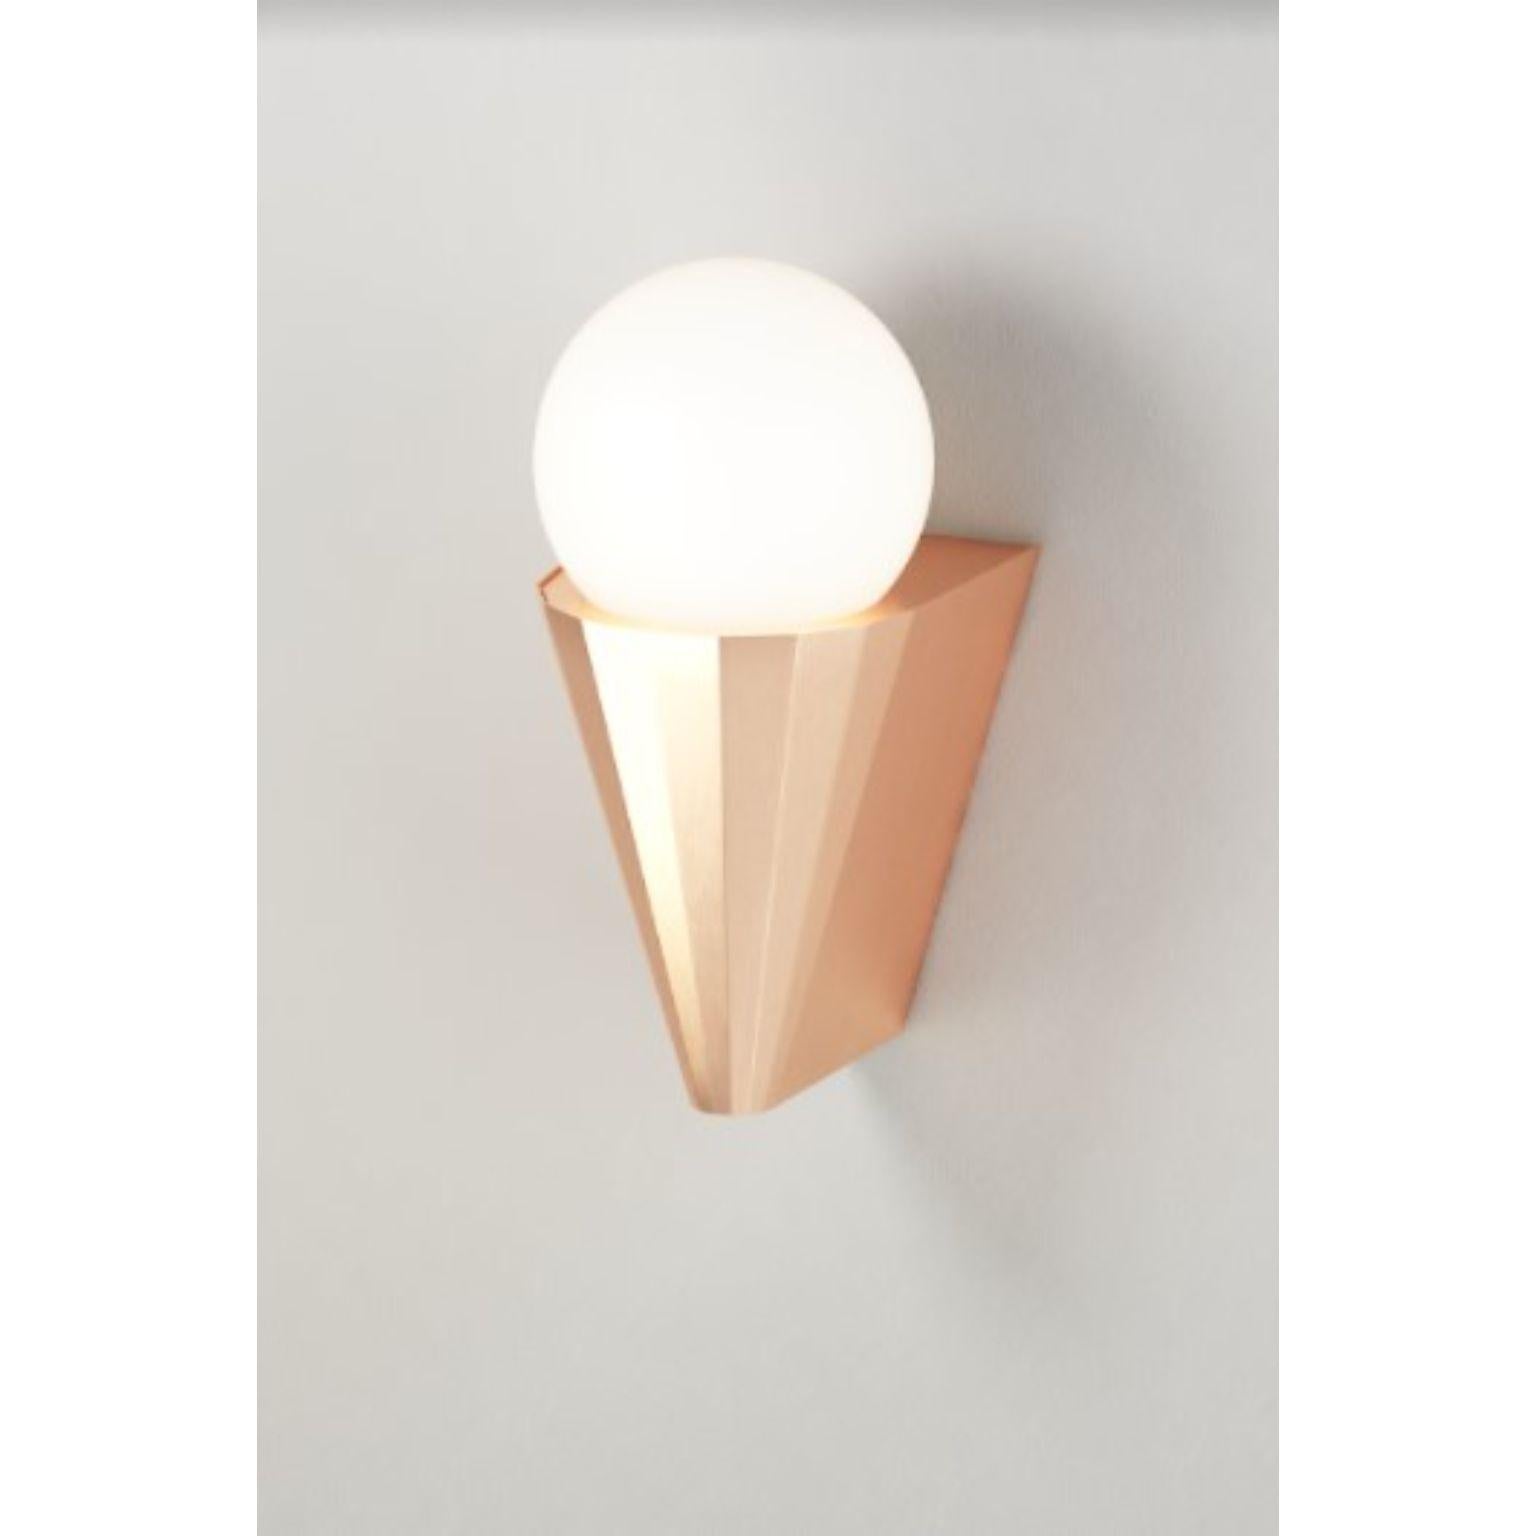 IP Cornet satin copper wall light by Emilie Cathelineau
Dimensions: D10 x W12.5 X H21.2 cm
Materials: solid brass, Satin Copper
Others finishes are available.

All our lamps can be wired according to each country. If sold to the USA it will be